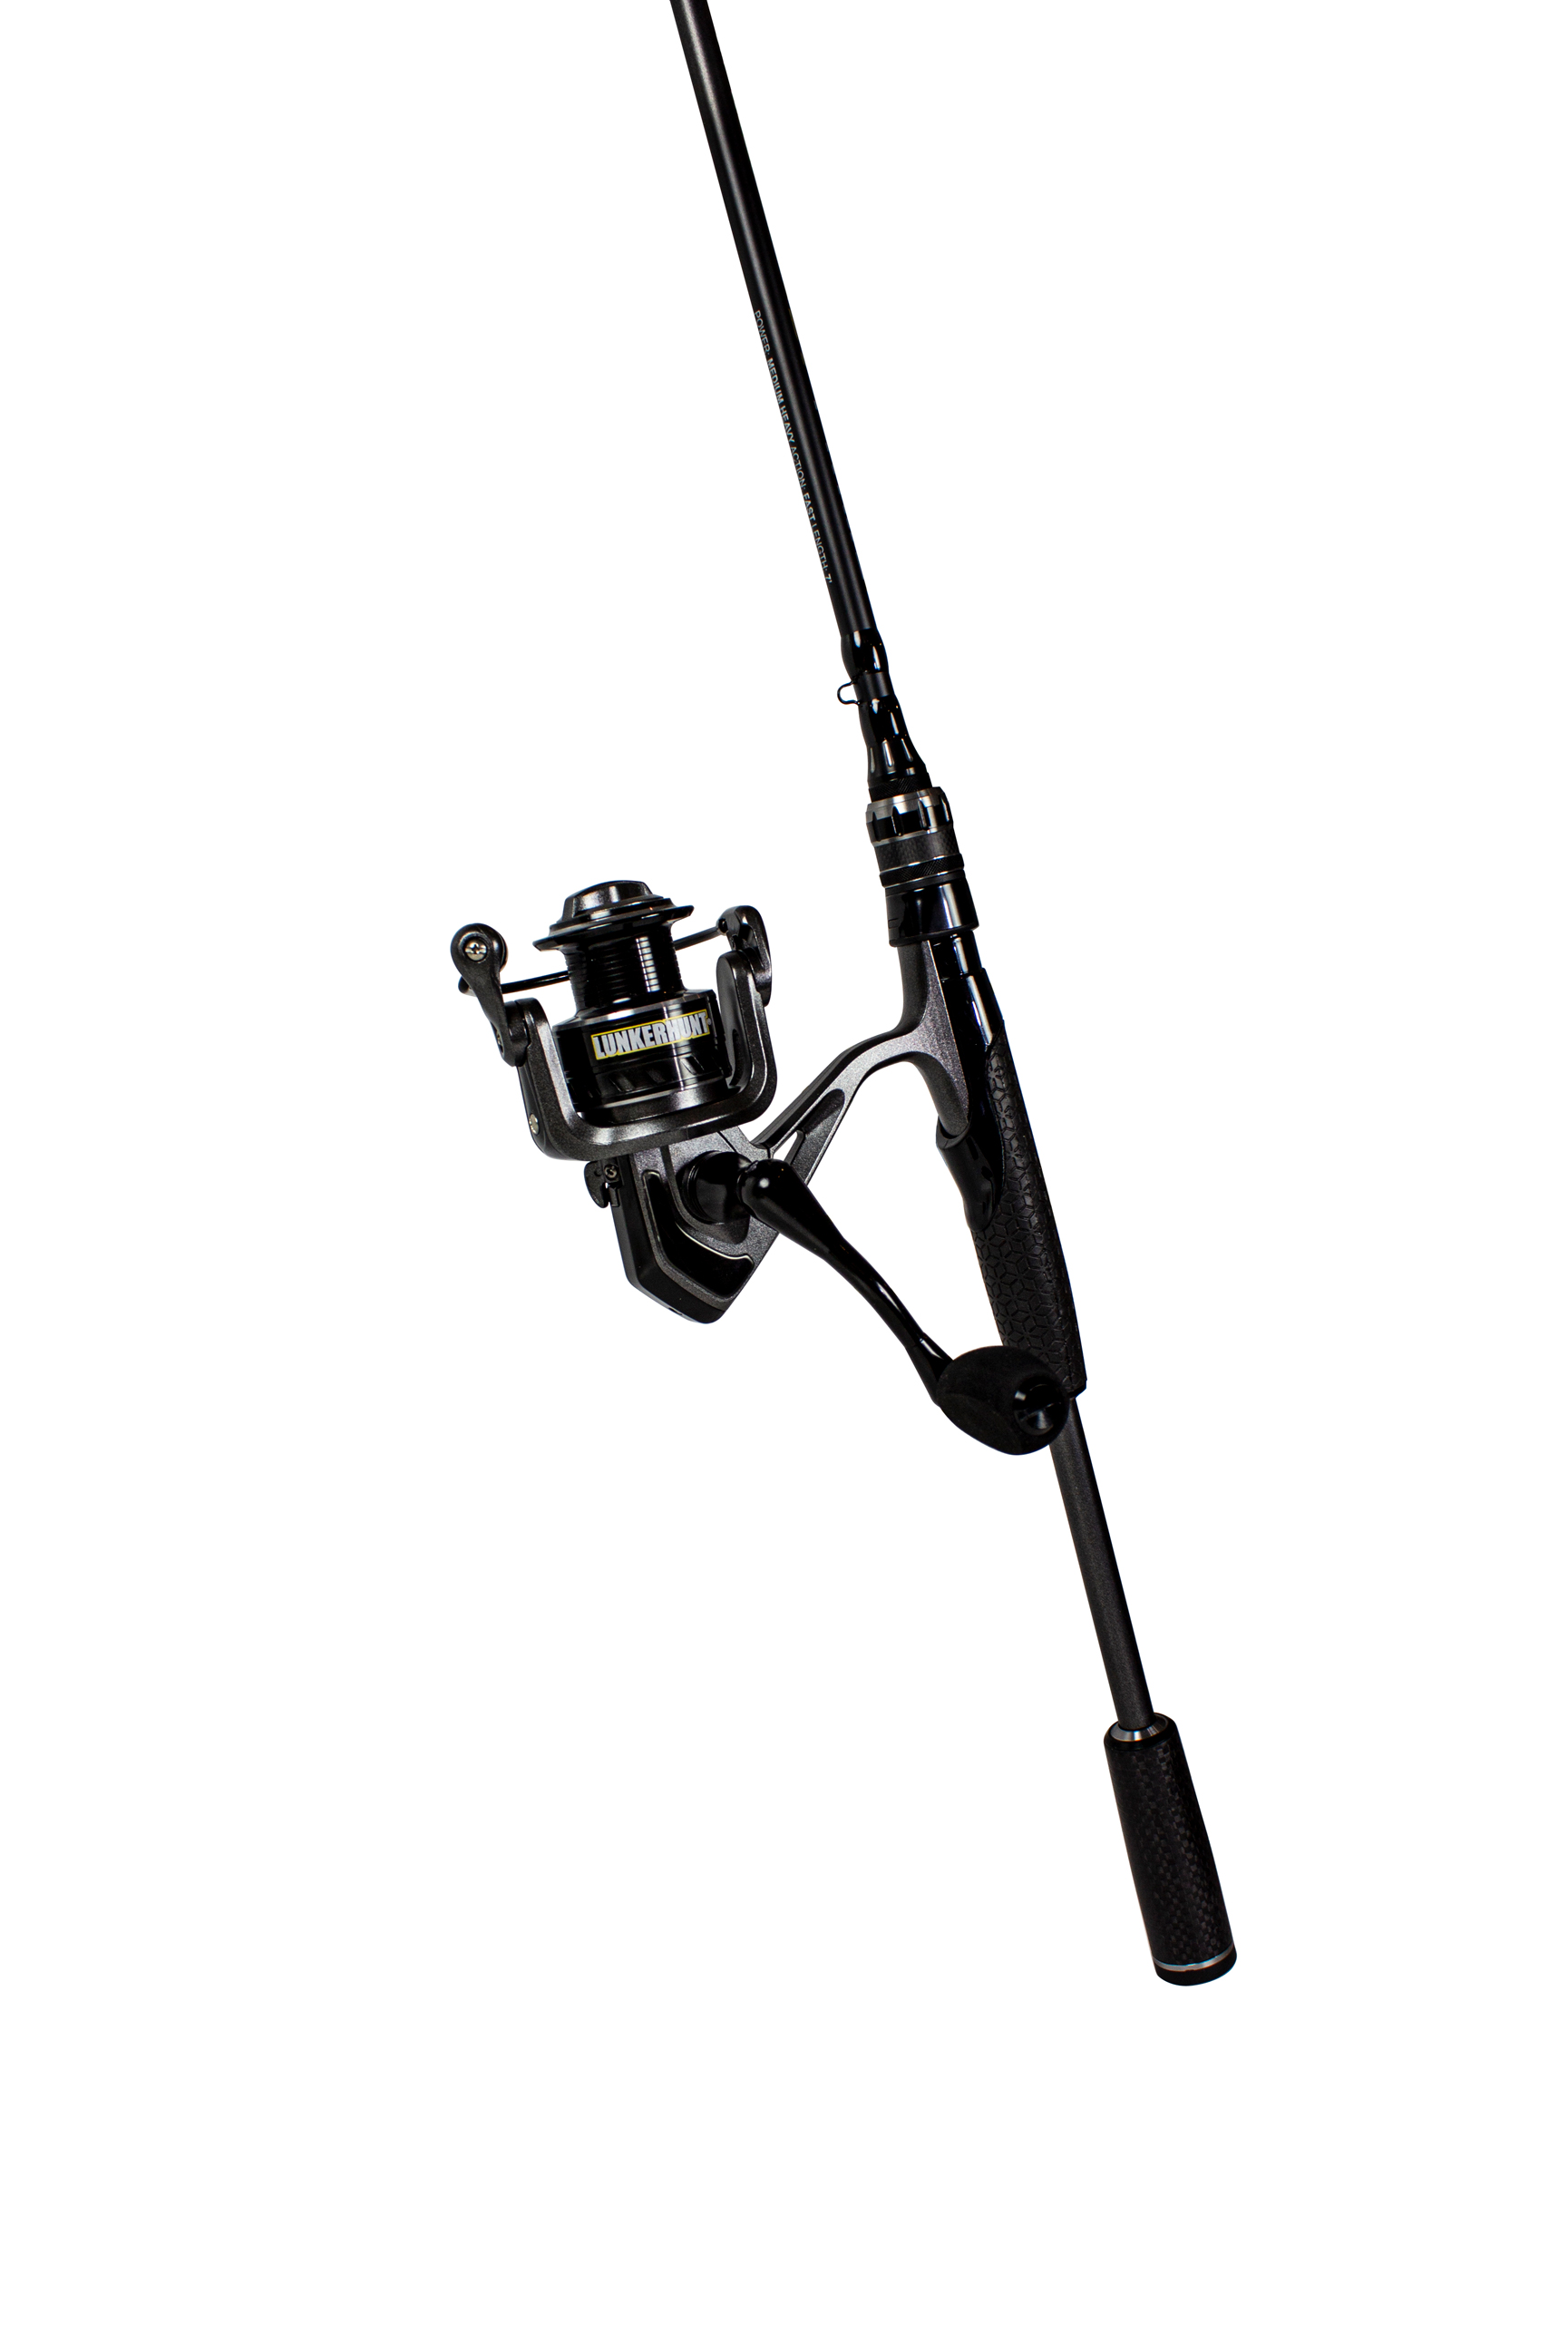 Lunkerhunt S7 Prime Spinning Rod Combo S7PRICOM01 , 14% Off with Free S&H —  CampSaver